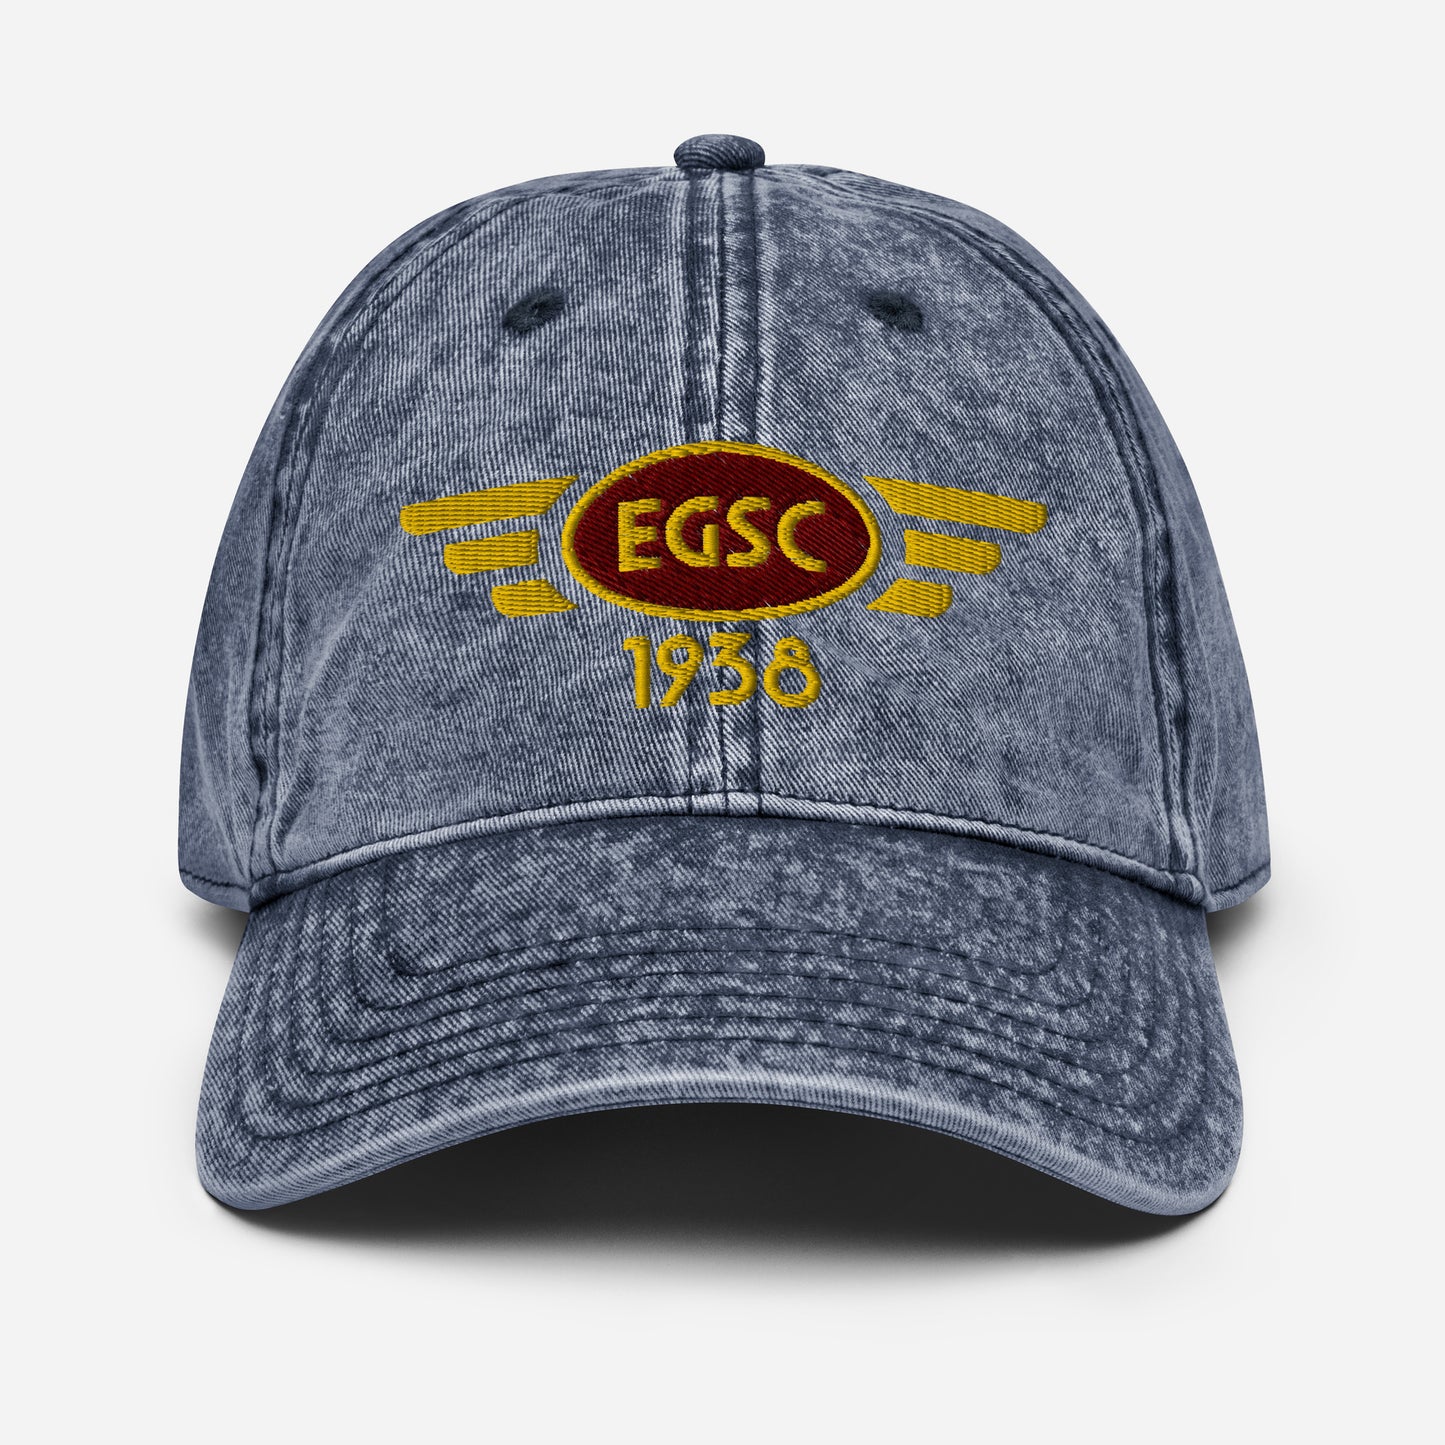 Cambridge Airport vintage cotton twill baseball cap with embroidered ICAO code.